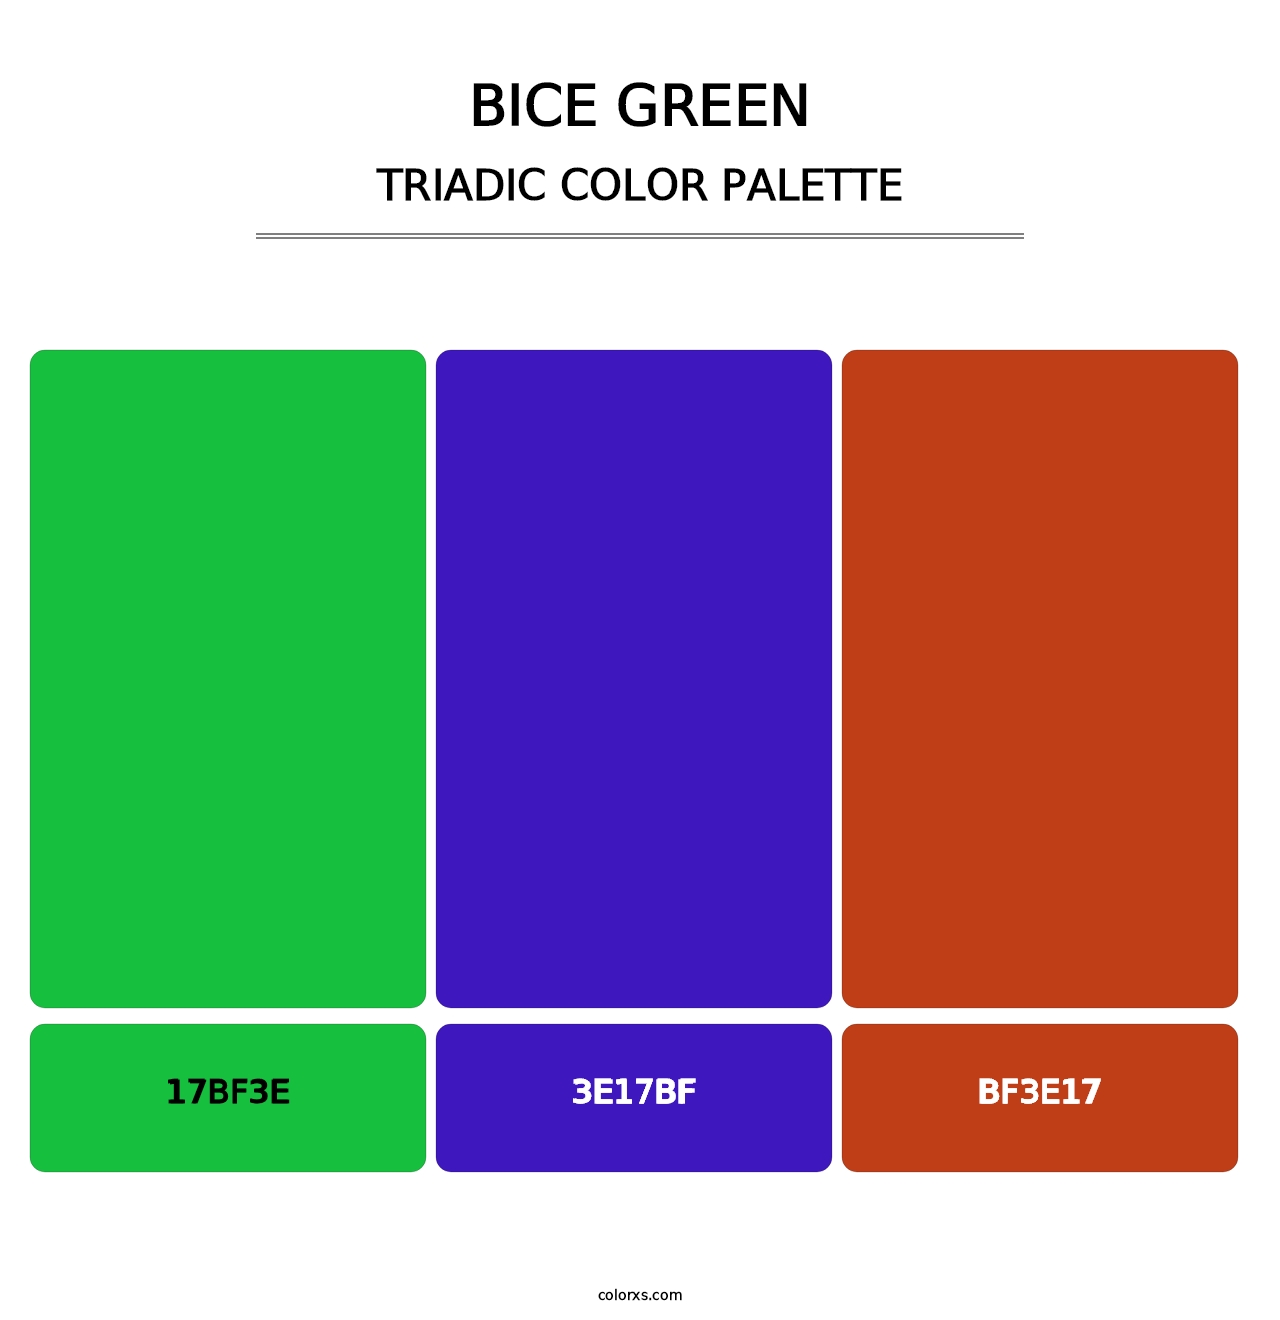 Bice Green - Triadic Color Palette